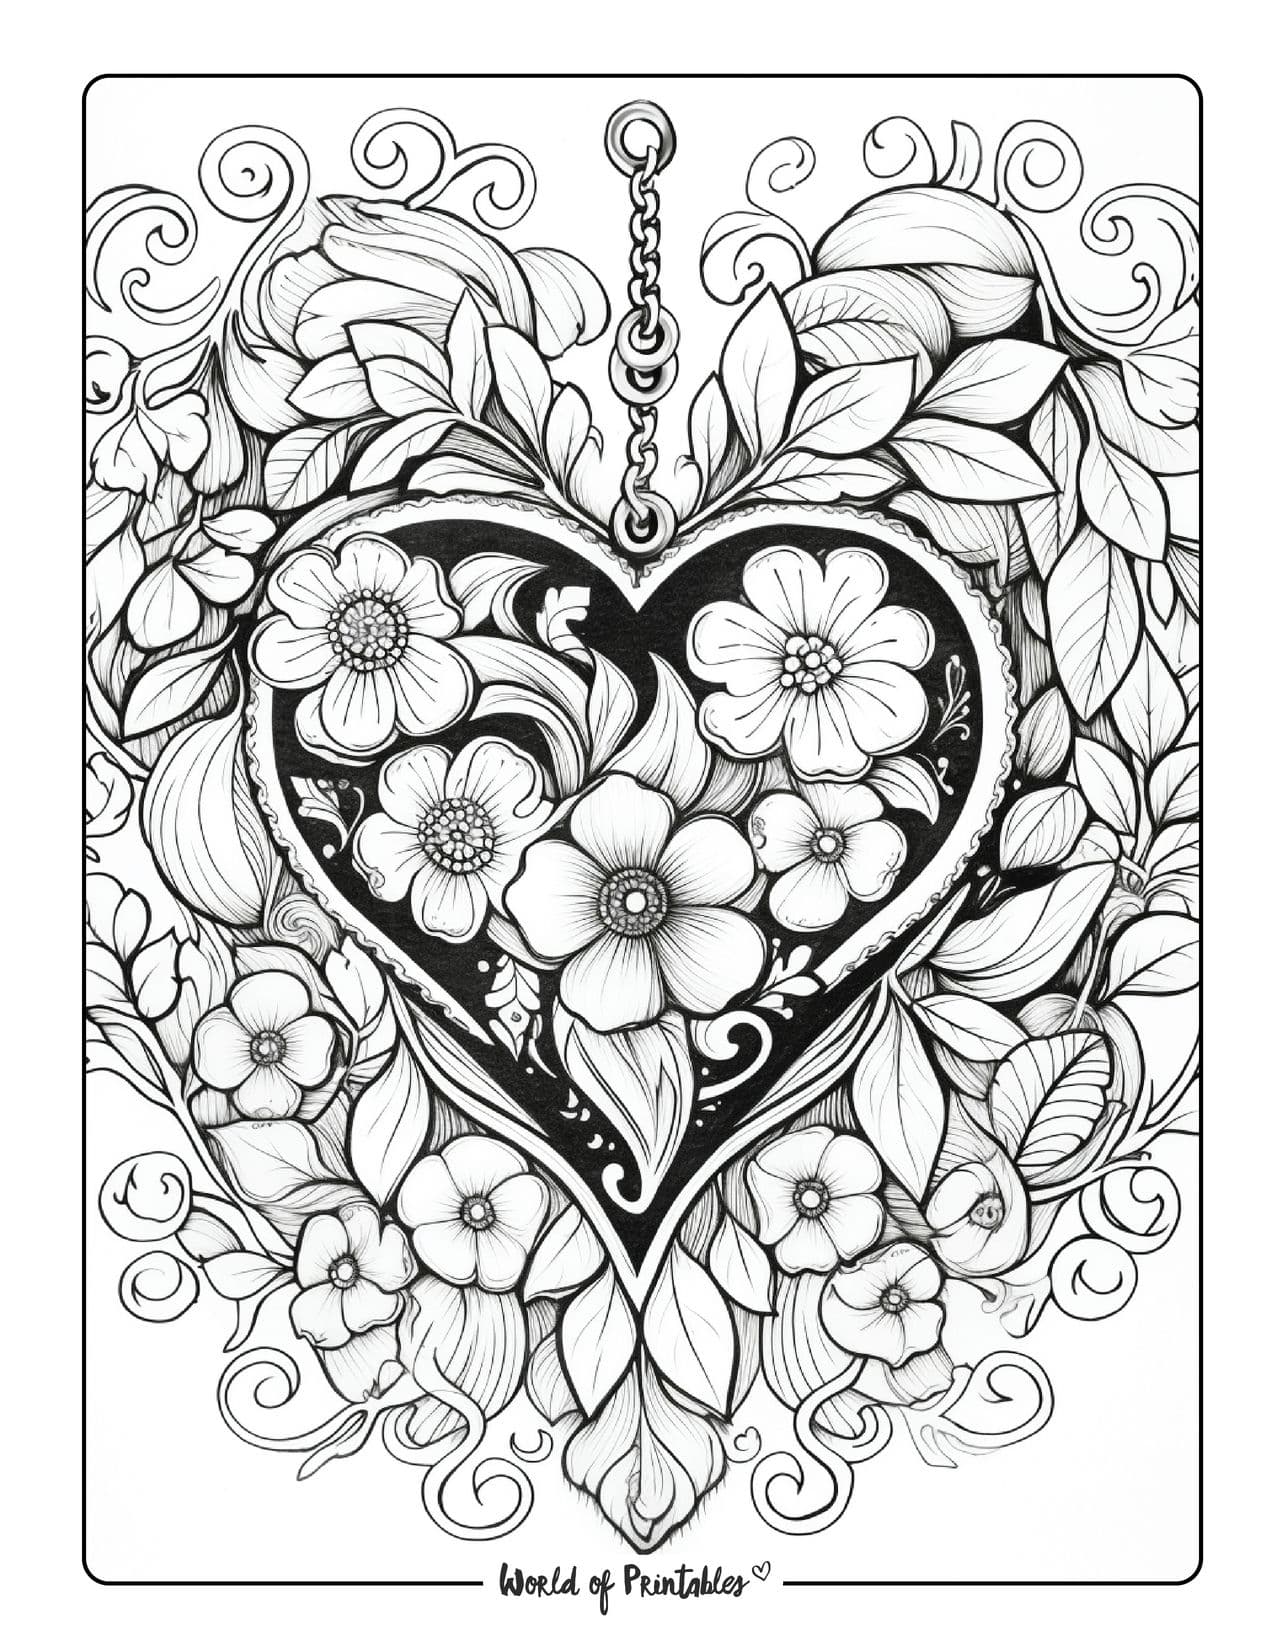 Love coloring pages